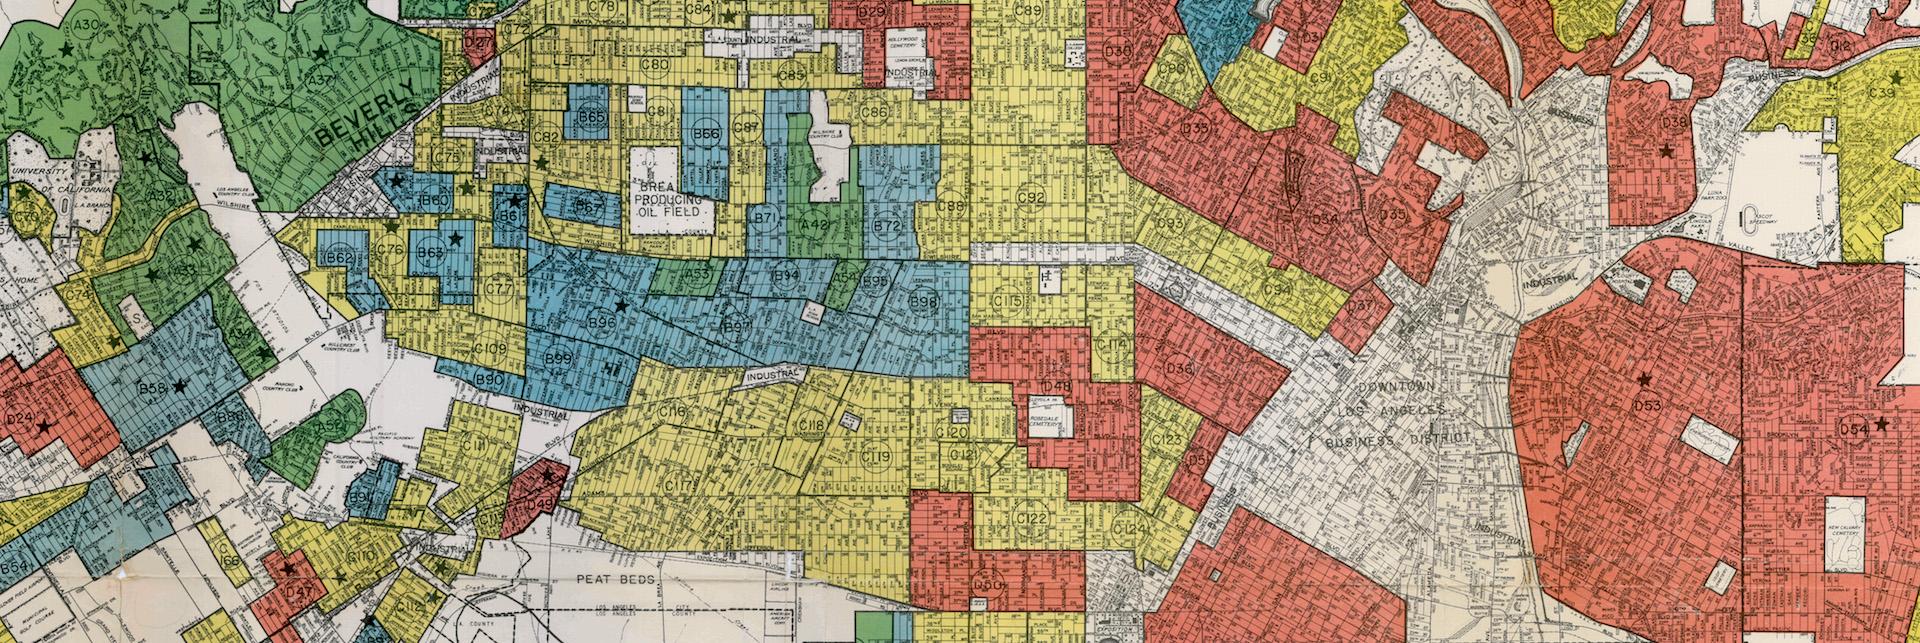 Redlining:
Legal Segregation and its After Effects on African Americans During COVID-19